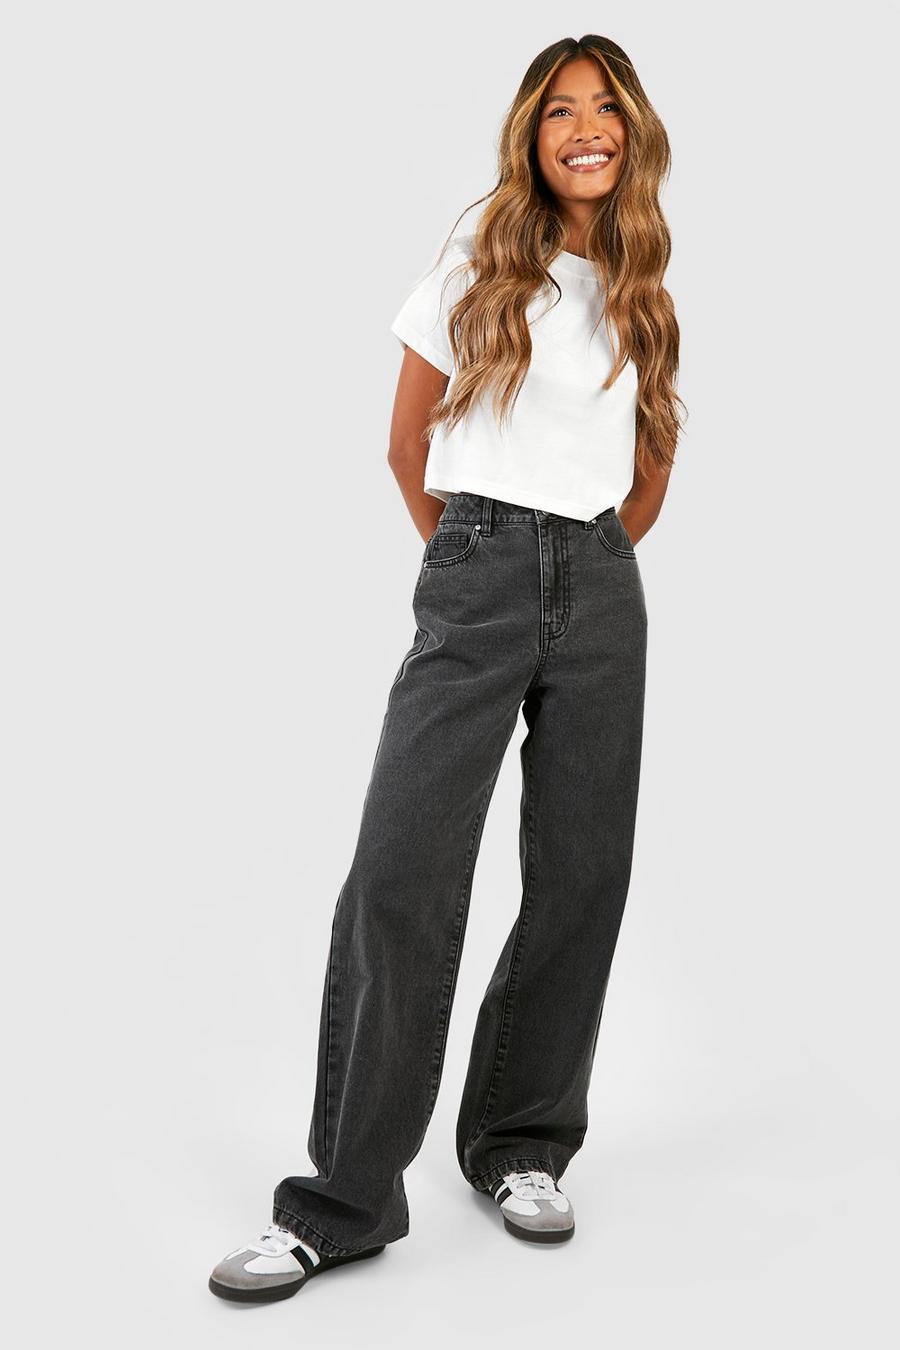 ASOS DESIGN high waist extreme tapered suit pants